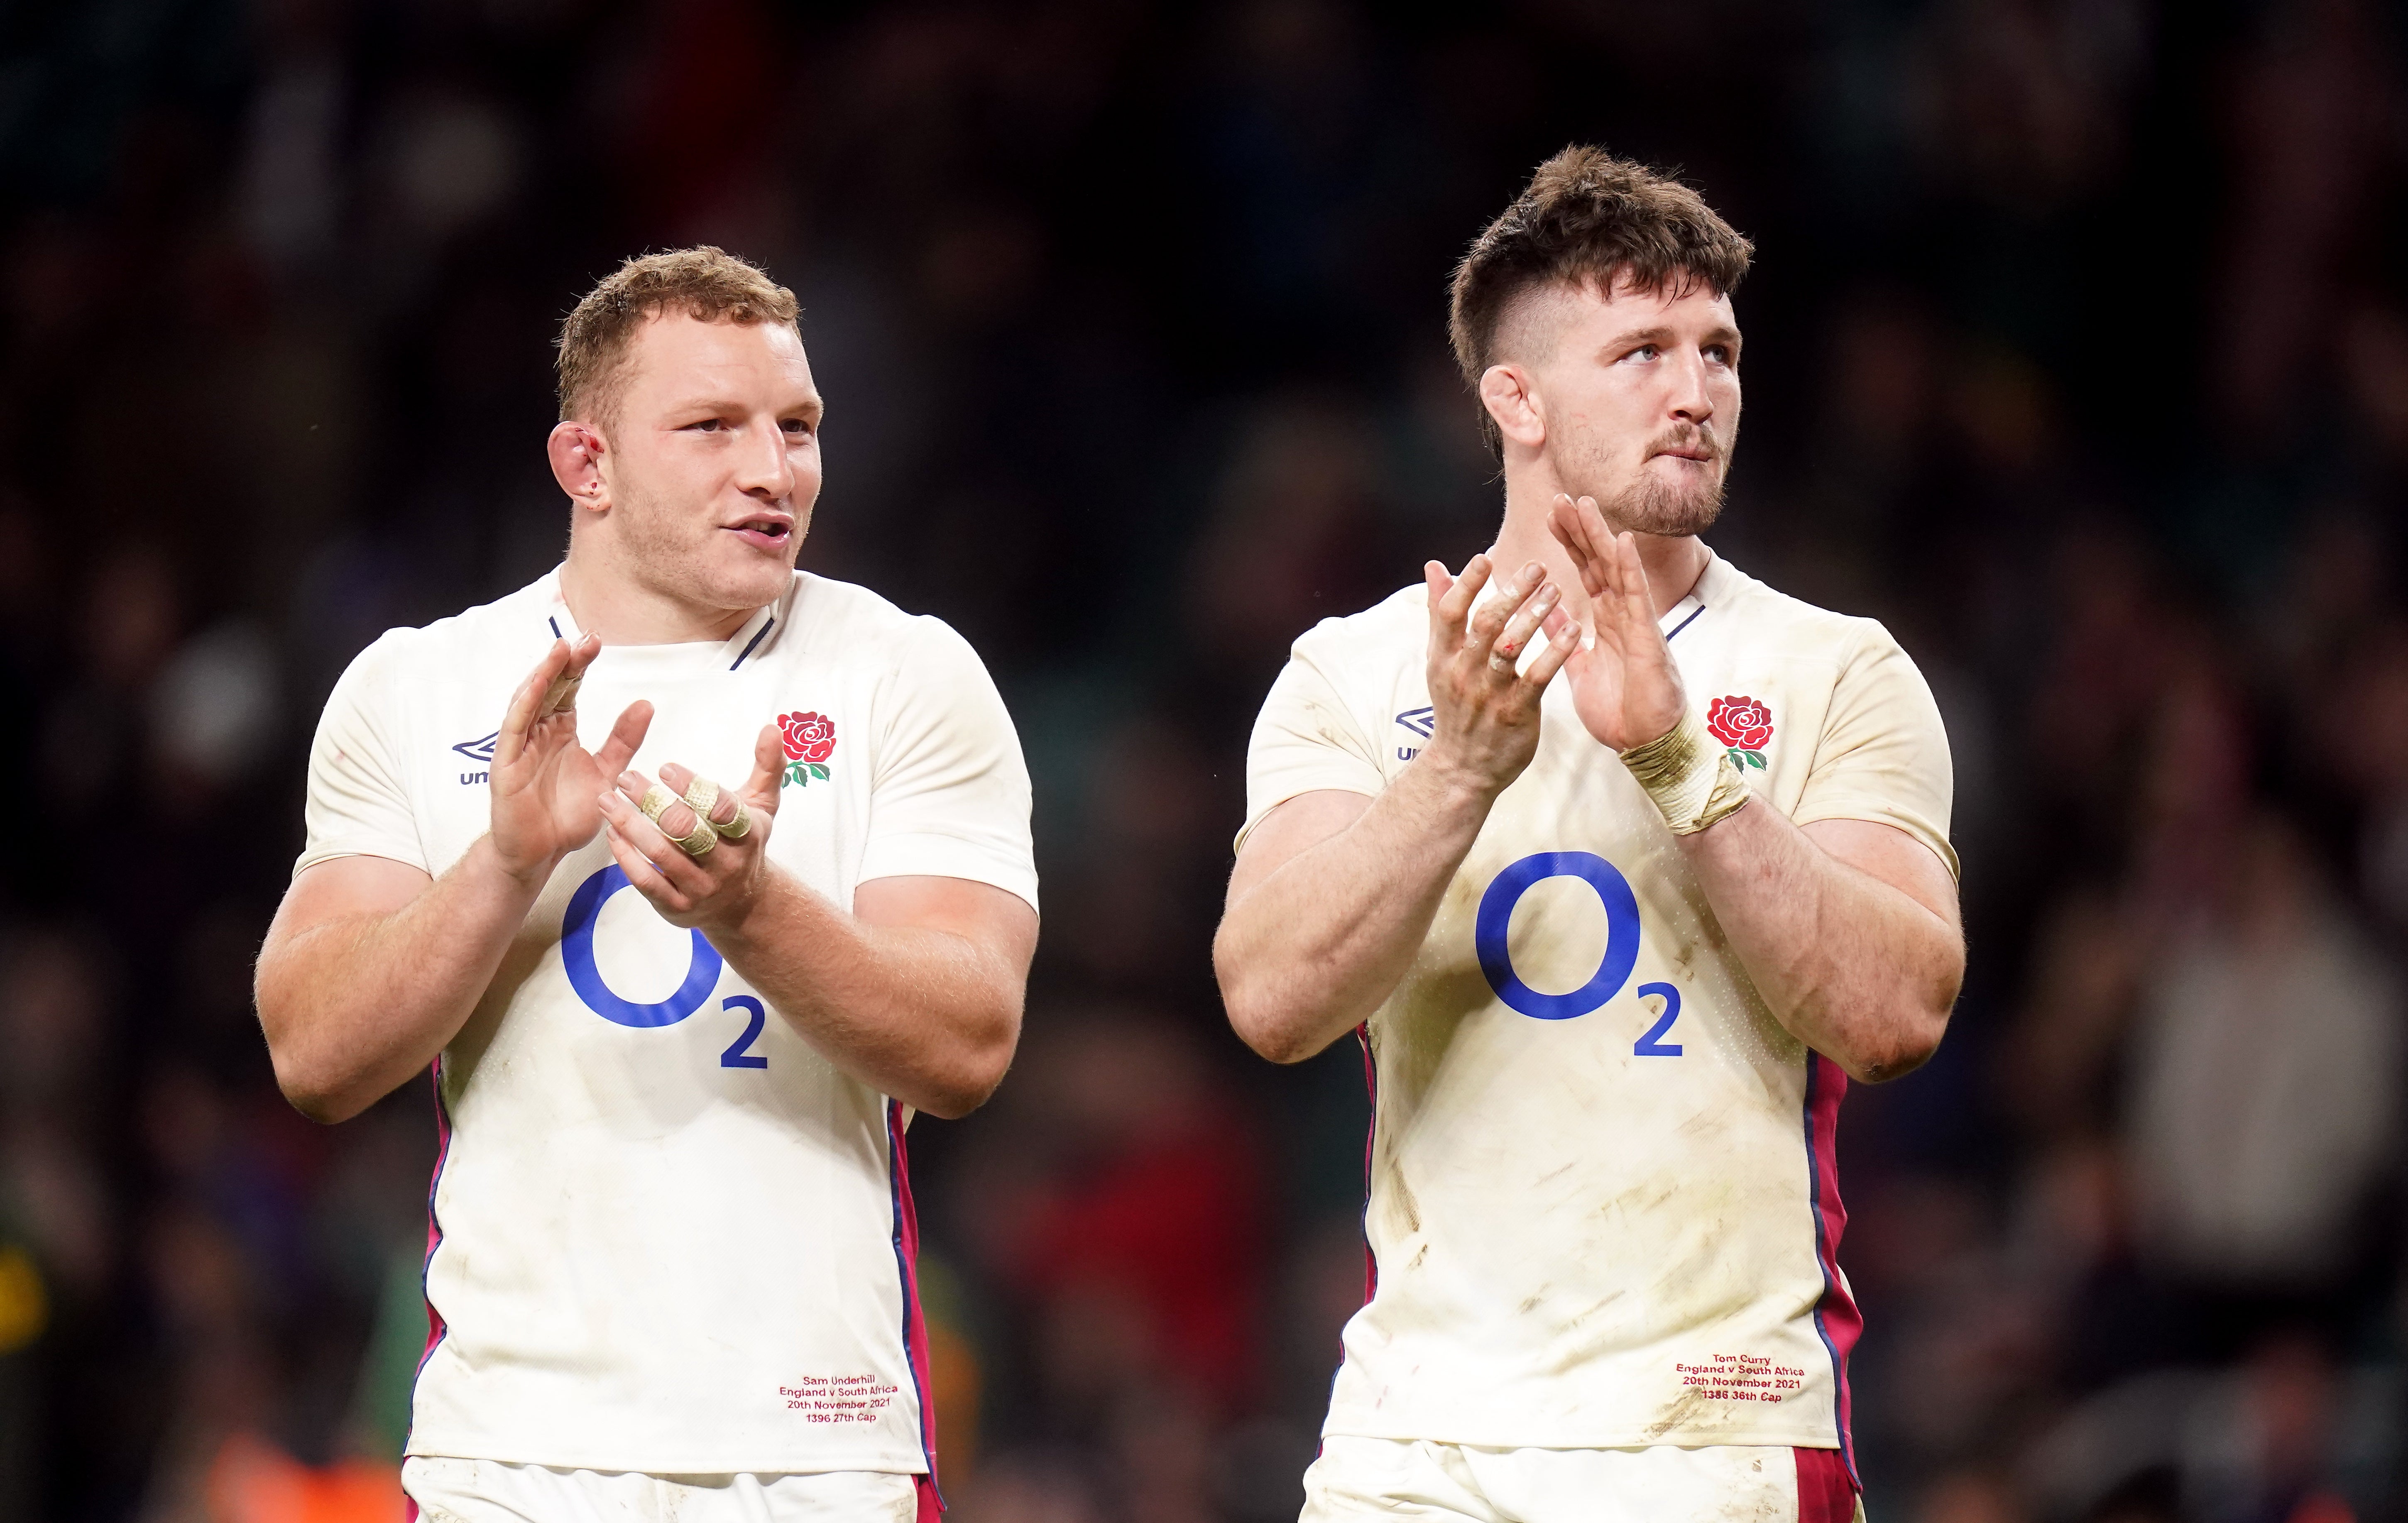 England have now lost ‘Kamikaze Kids’ Sam Underhill (left) and Tom Curry (right) to concussion (Adam Davy/PA)